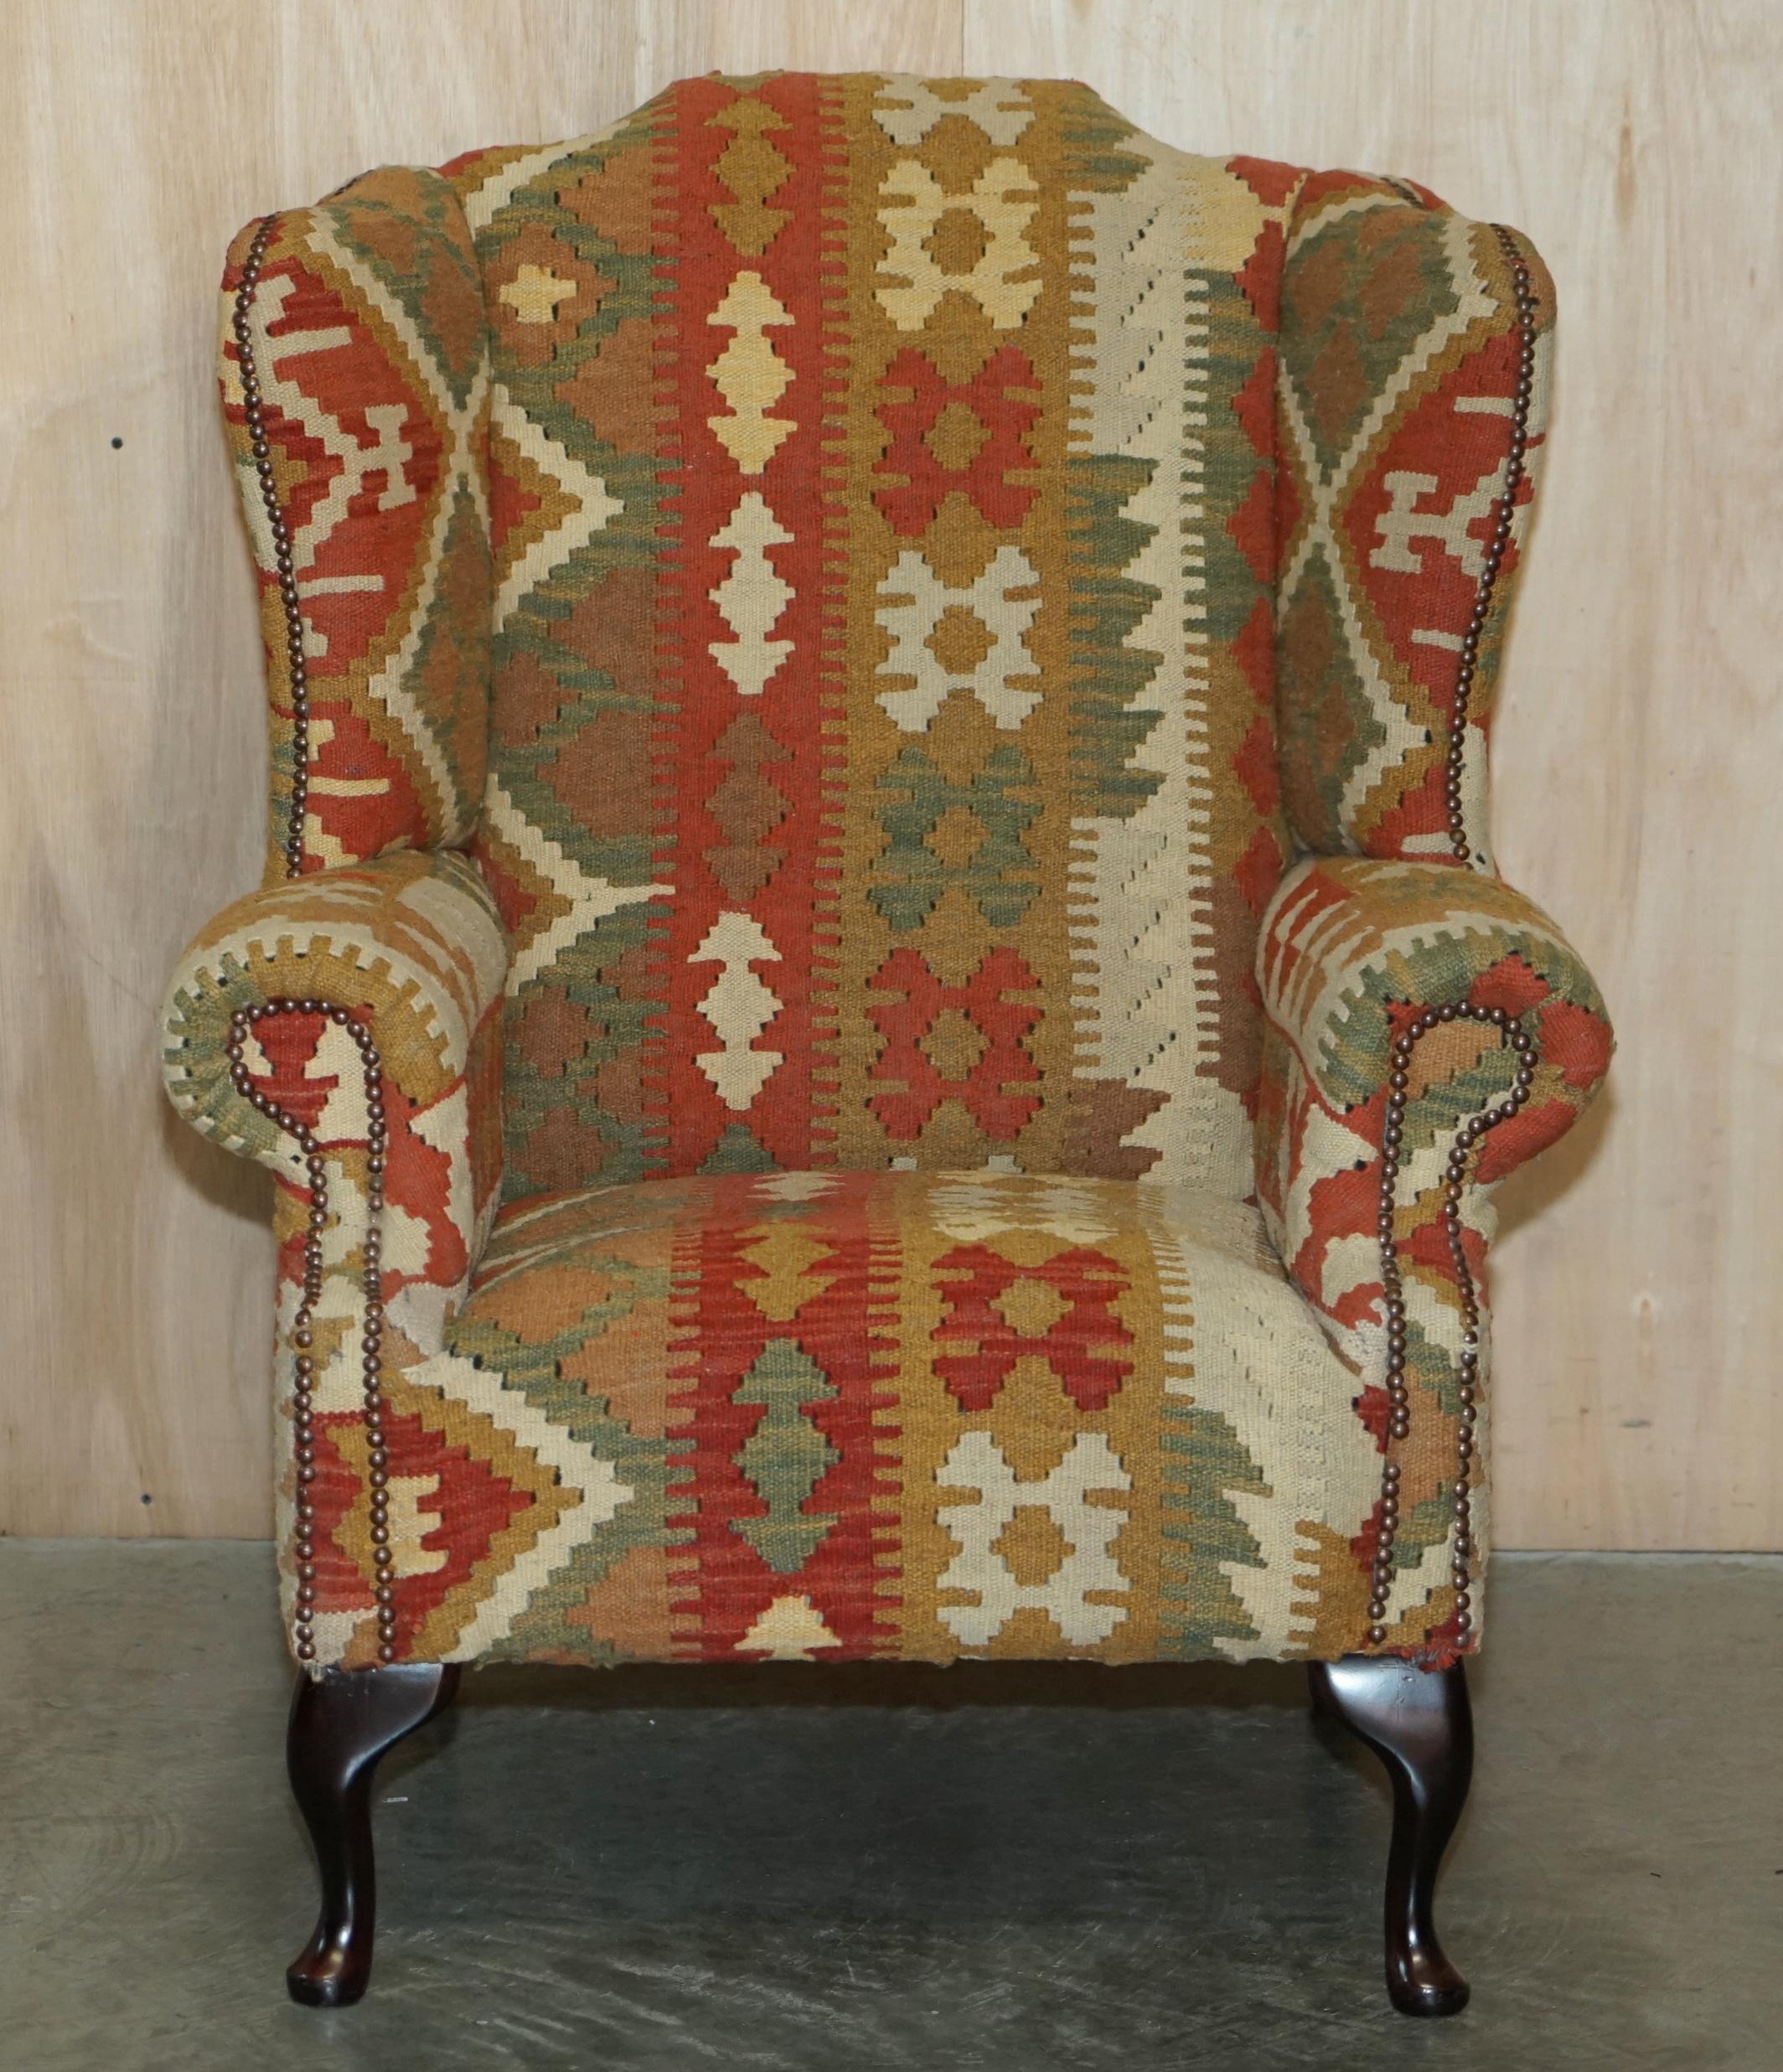 We are delighted to offer for sale this stunning George Smith style Aztec Kilim upholstered wingback armchair in perfect condition throughout.

A well-made and decorative armchair which is very comfortable, the upholstery is Kilim as mentioned